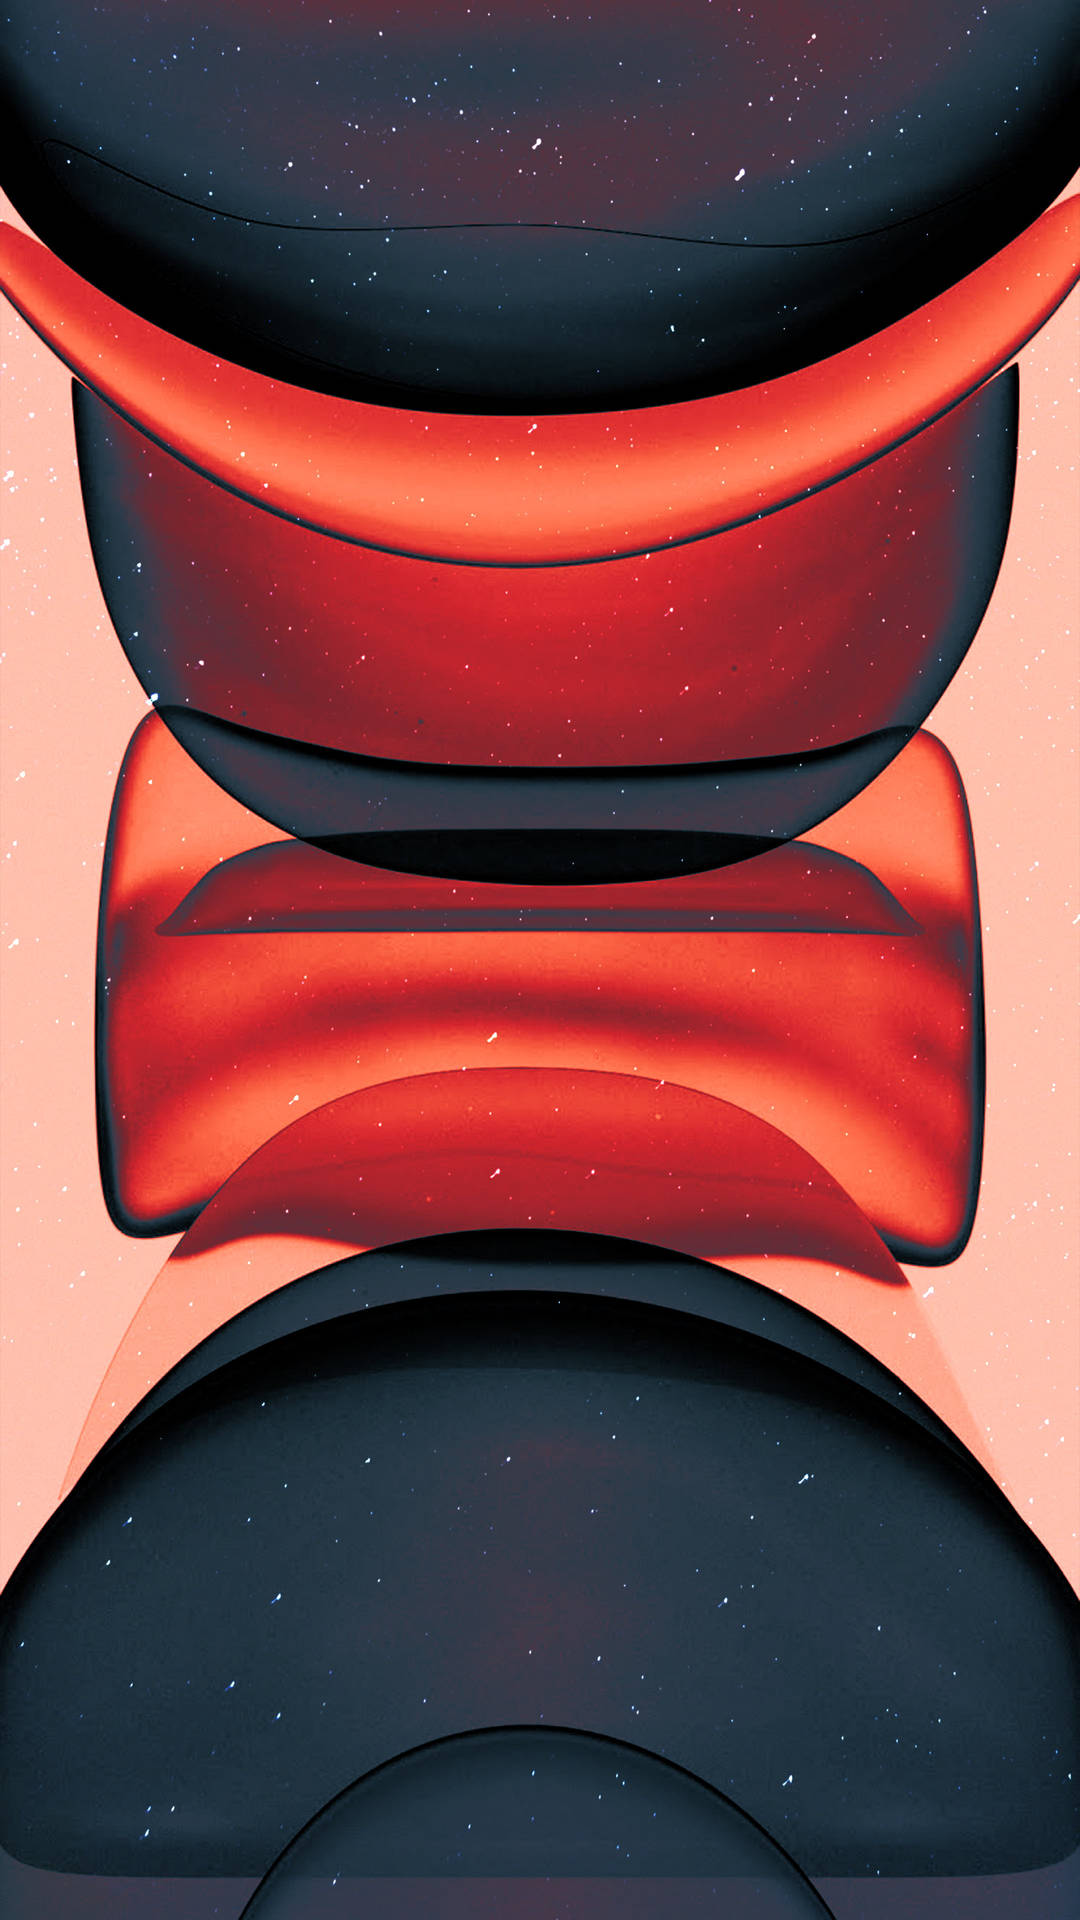 Iphone Xr Red Jelly Bean Background